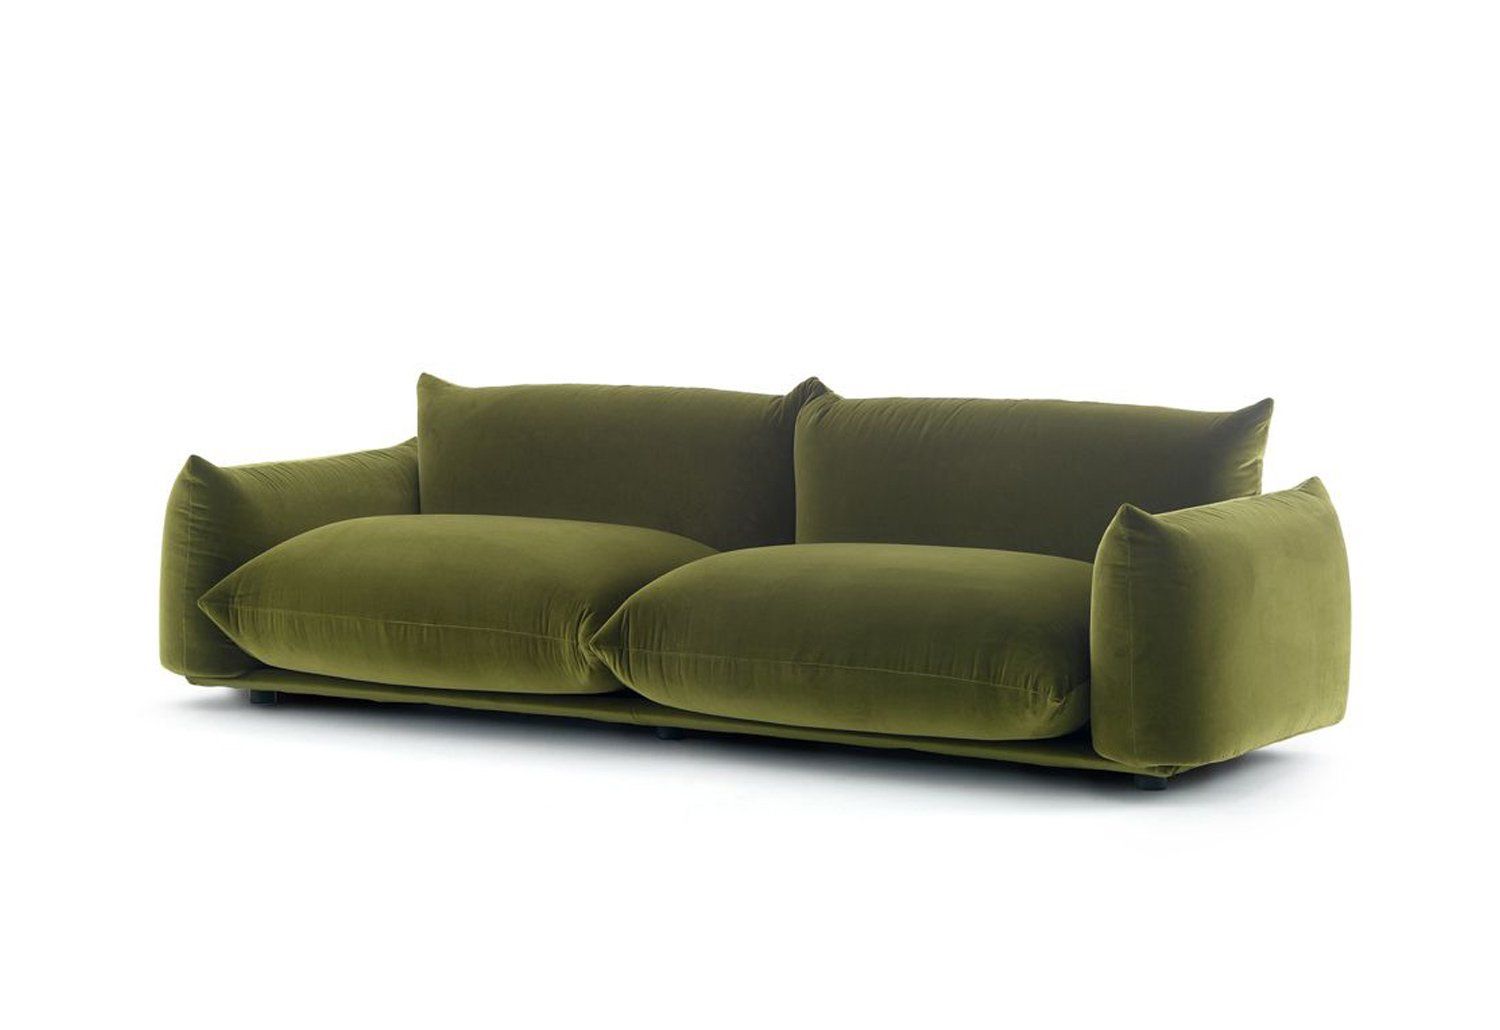 2 Seater Sofa “Compact and Stylish Loveseats Perfect for Small Spaces”